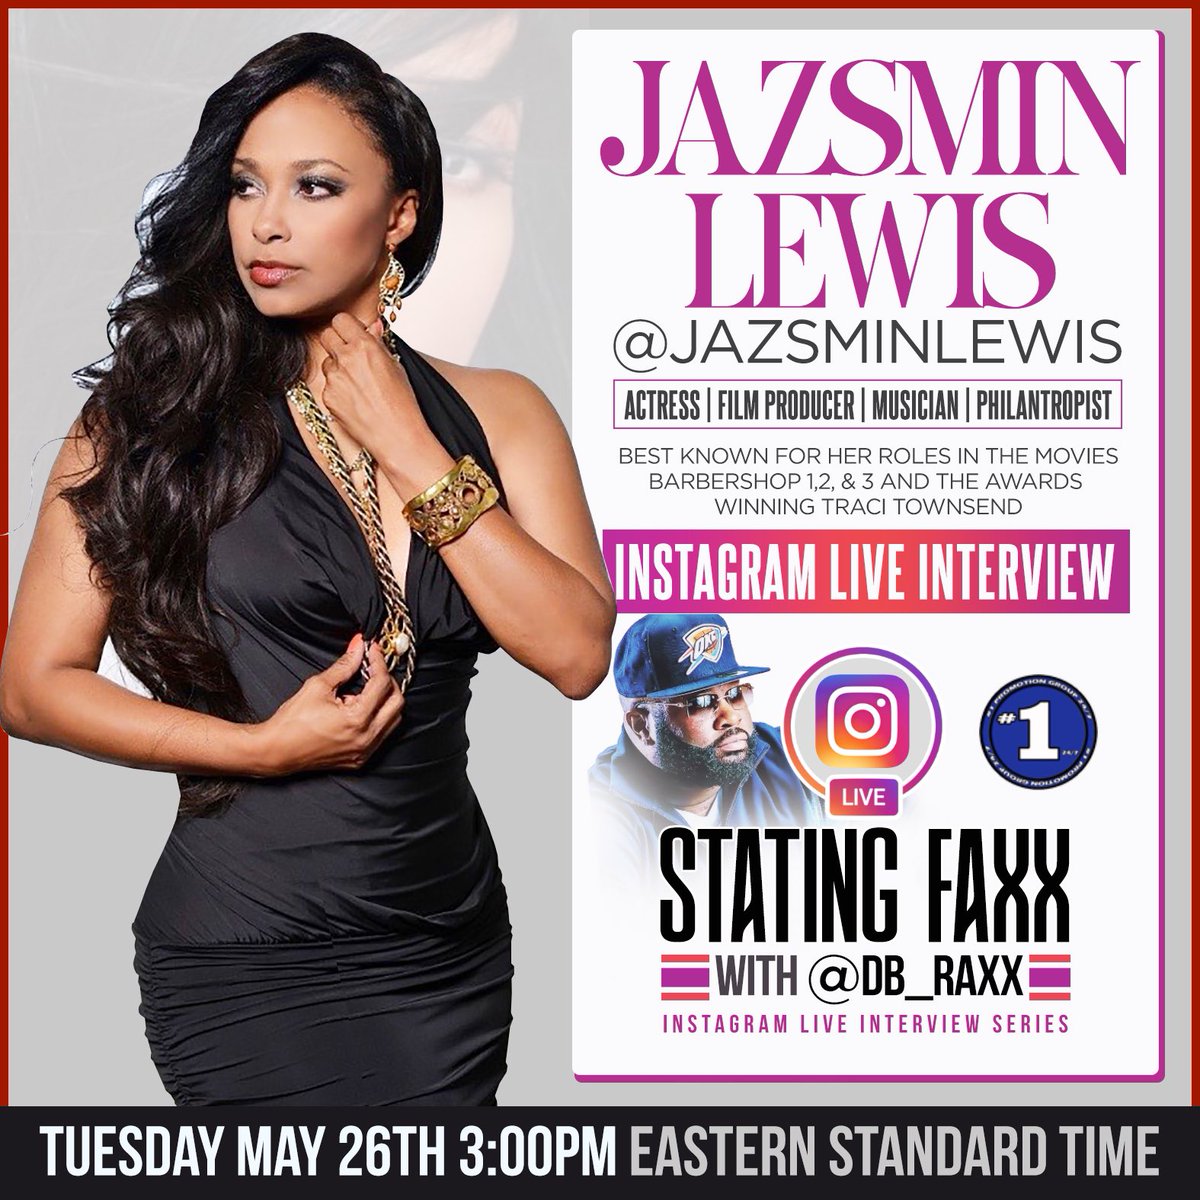 THIS TUESDAY May 26th at 3pm EST
ON #IGLive an interview with Actress @jazsminlewis #JazsminLewis #StatingFaxxWithDB_Raxx make sure u tune in! #Actress #Interview #barbershopthenextcut #icecube  #nickiminaj #film #producer #philantropist #Musician #Thespian #Host #instagram